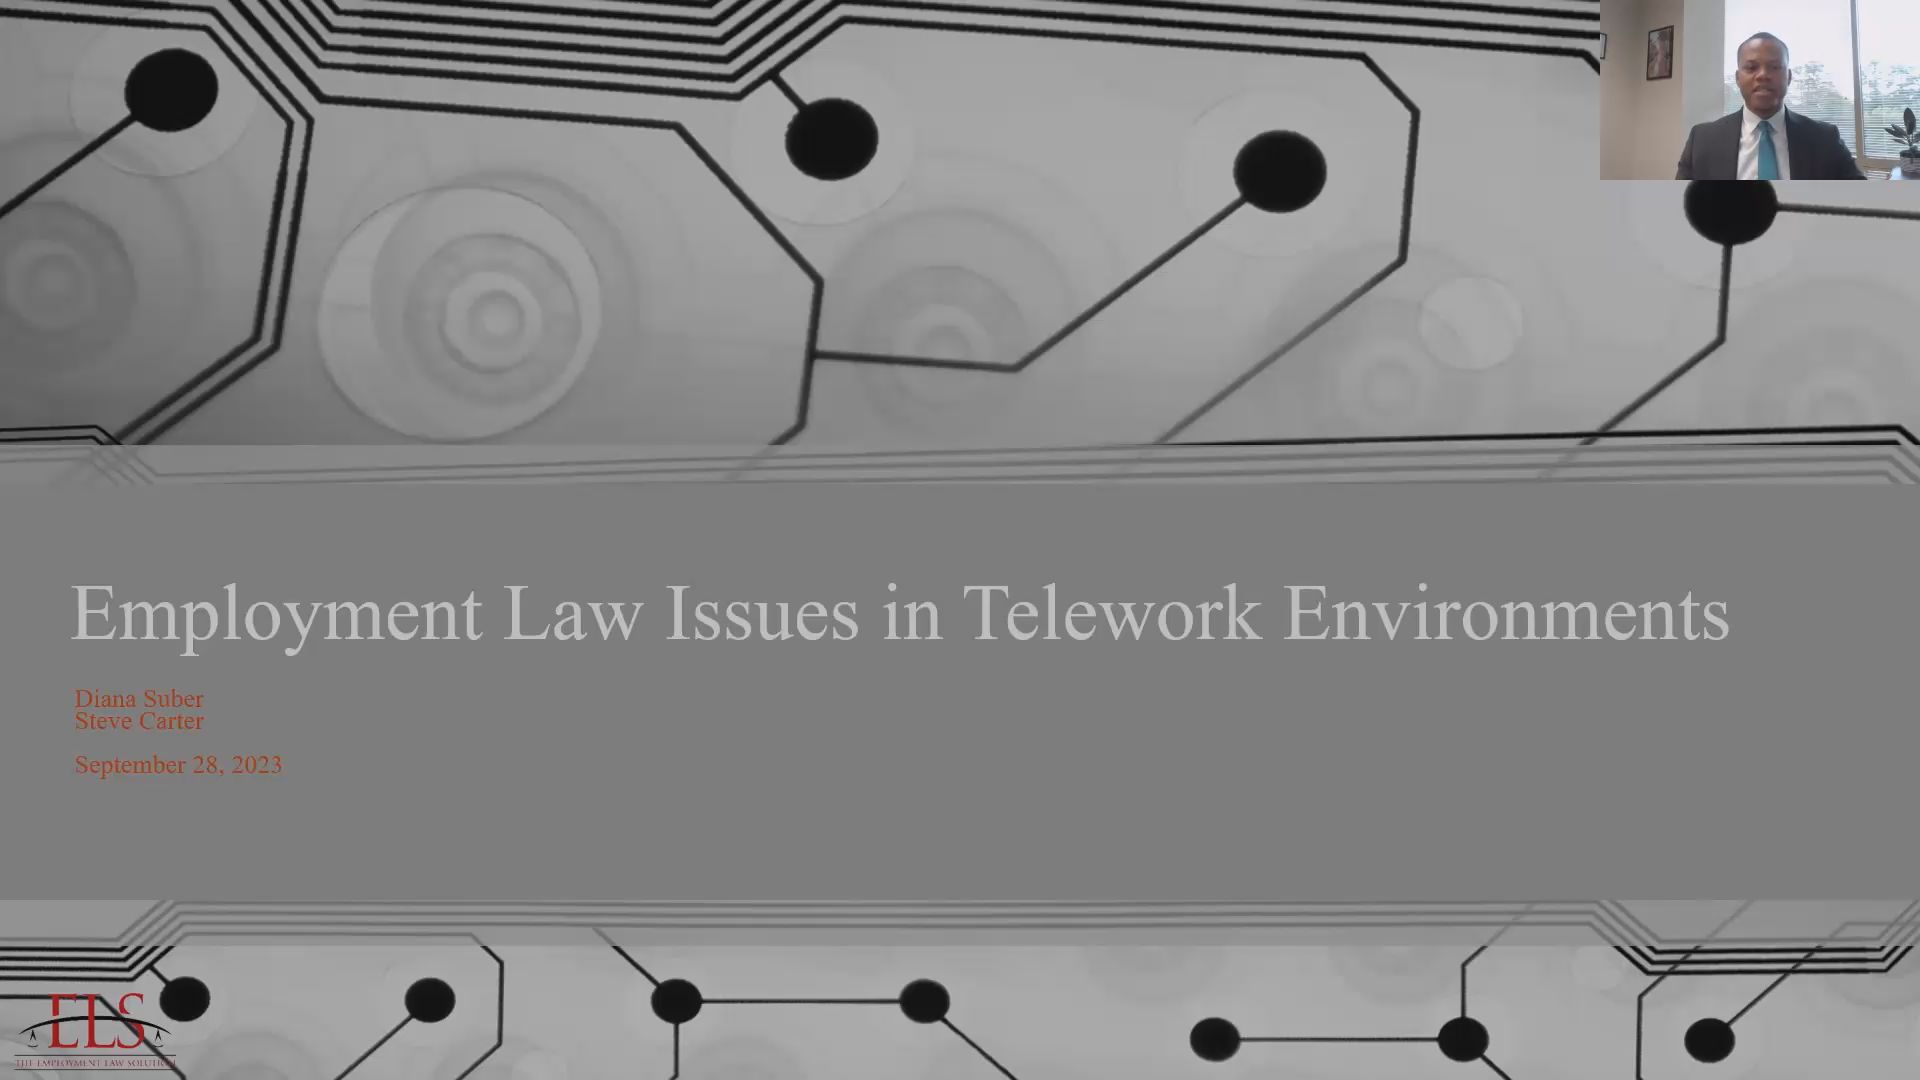 Employment Law Issues in Telework Environments Thumbnail